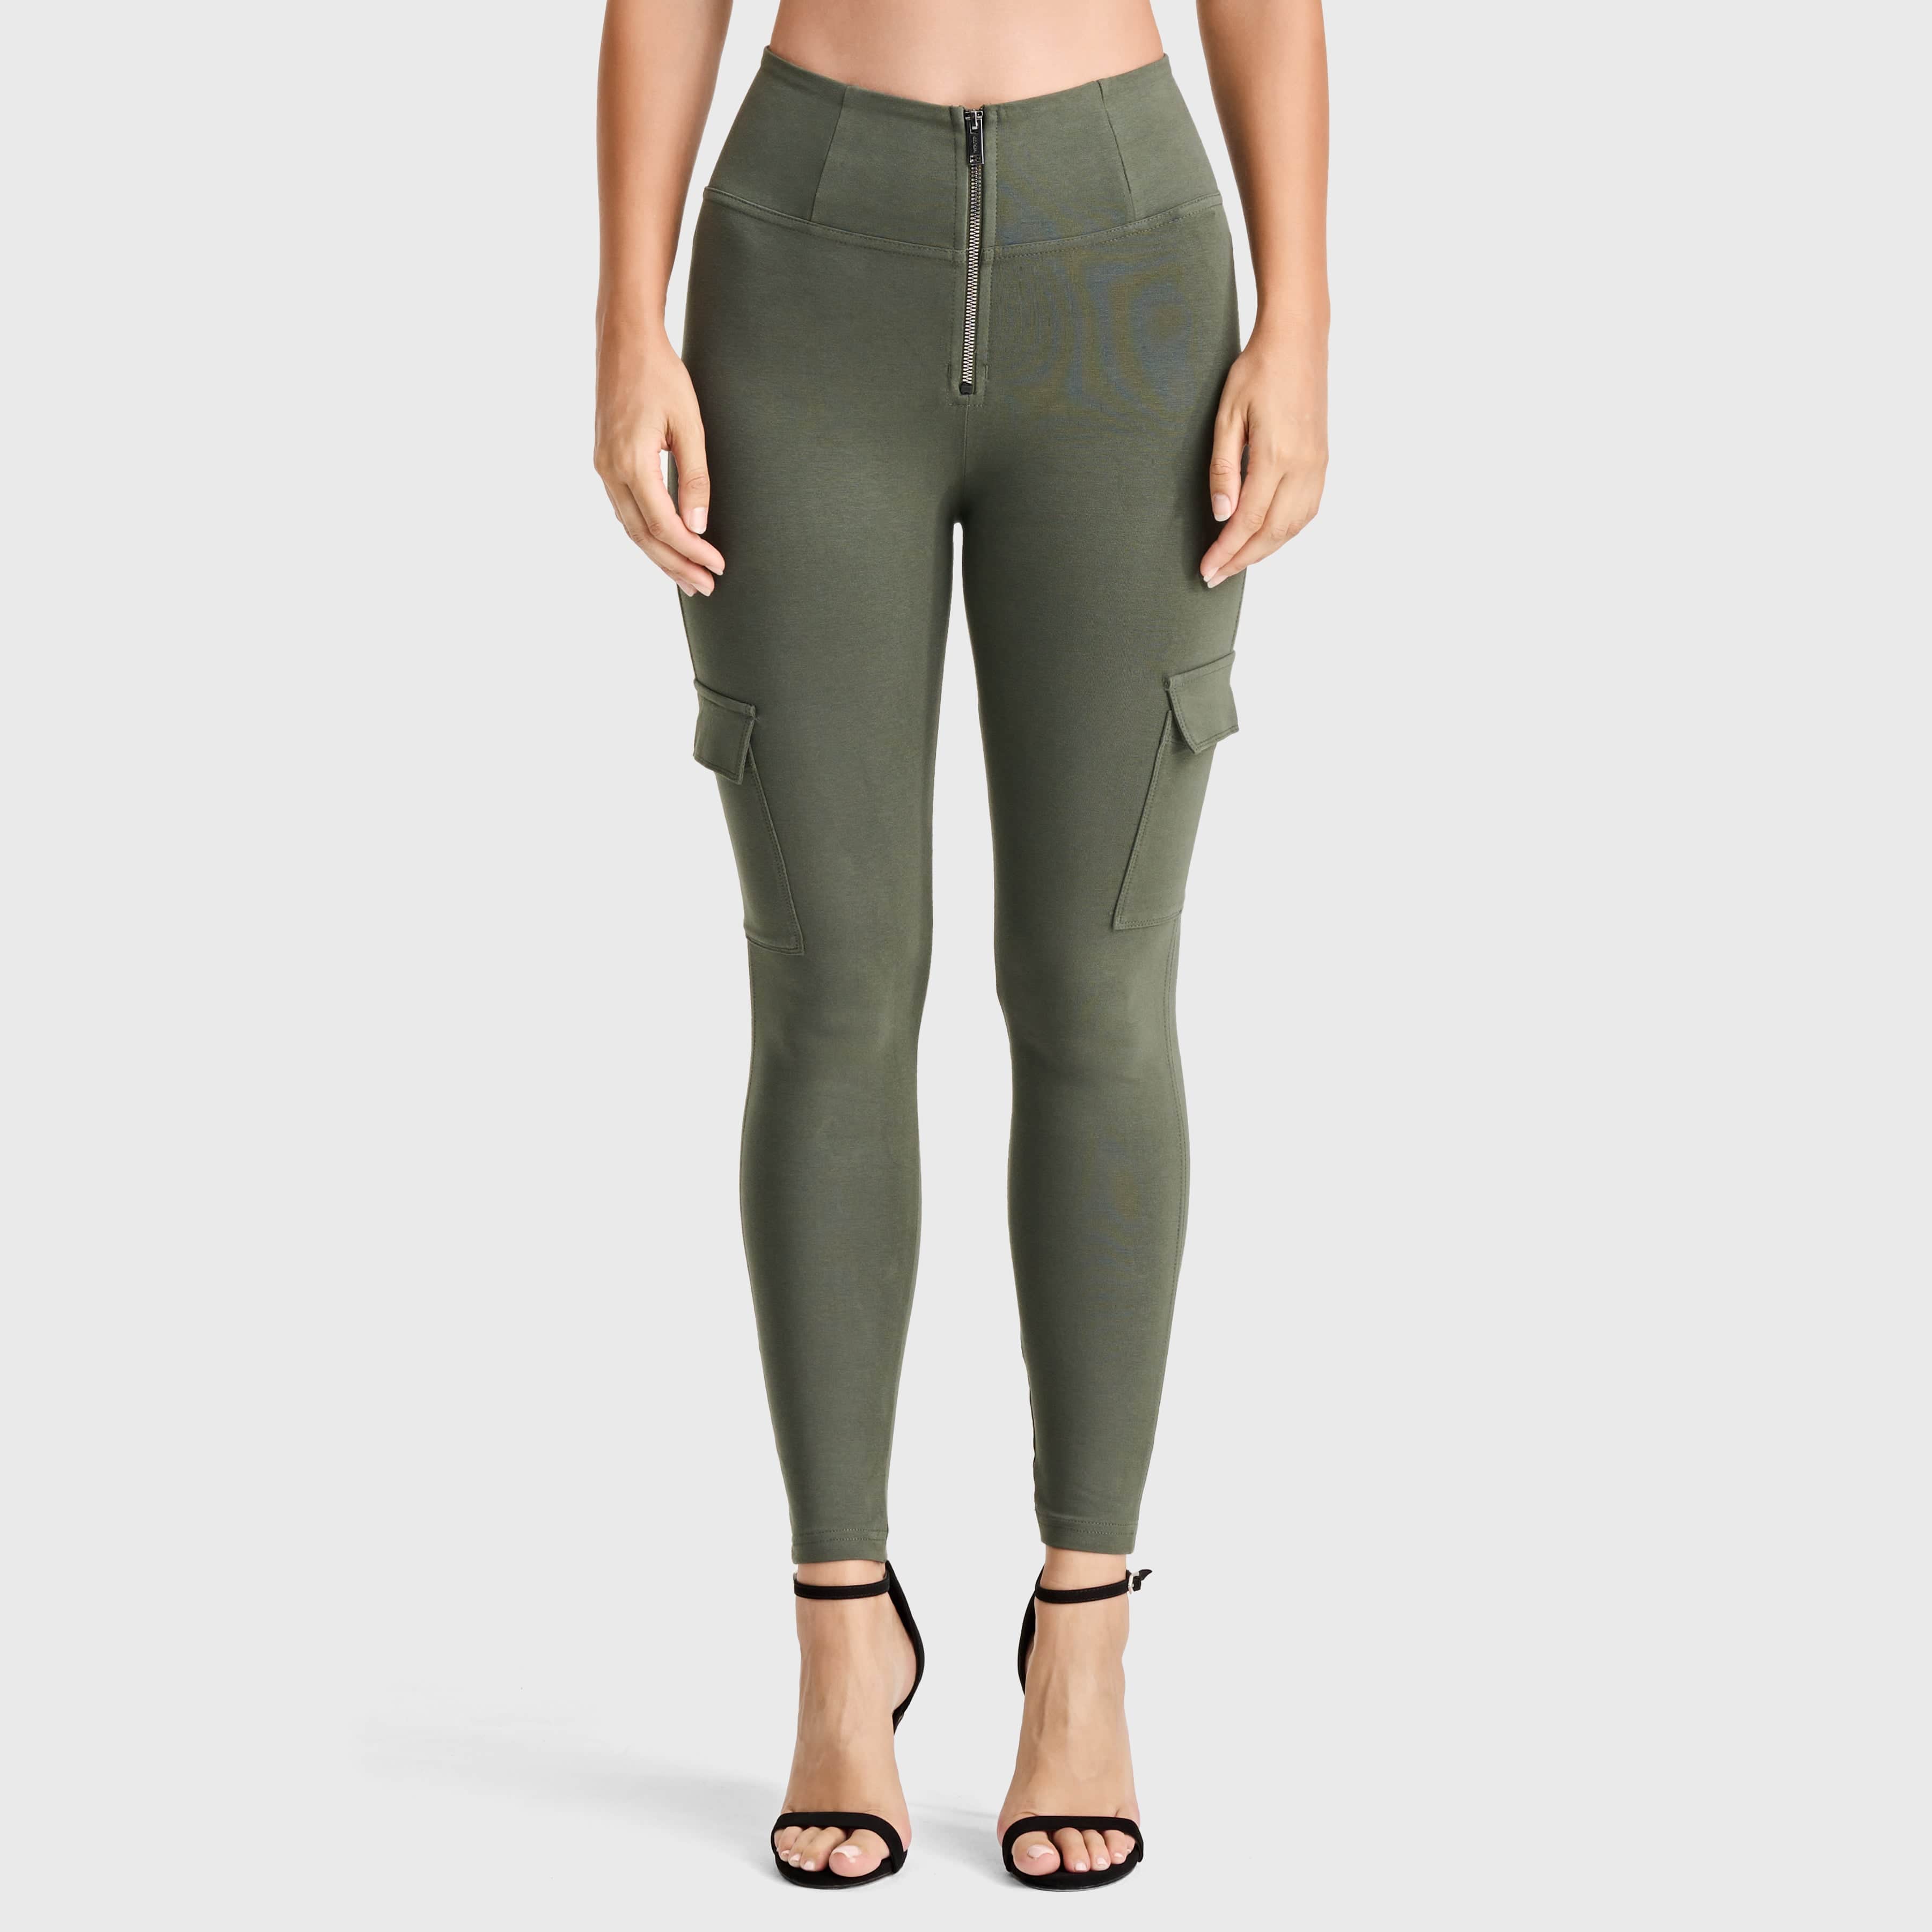 WR.UP® Cargo Fashion - High Waisted - Petite Length - Military Green 3